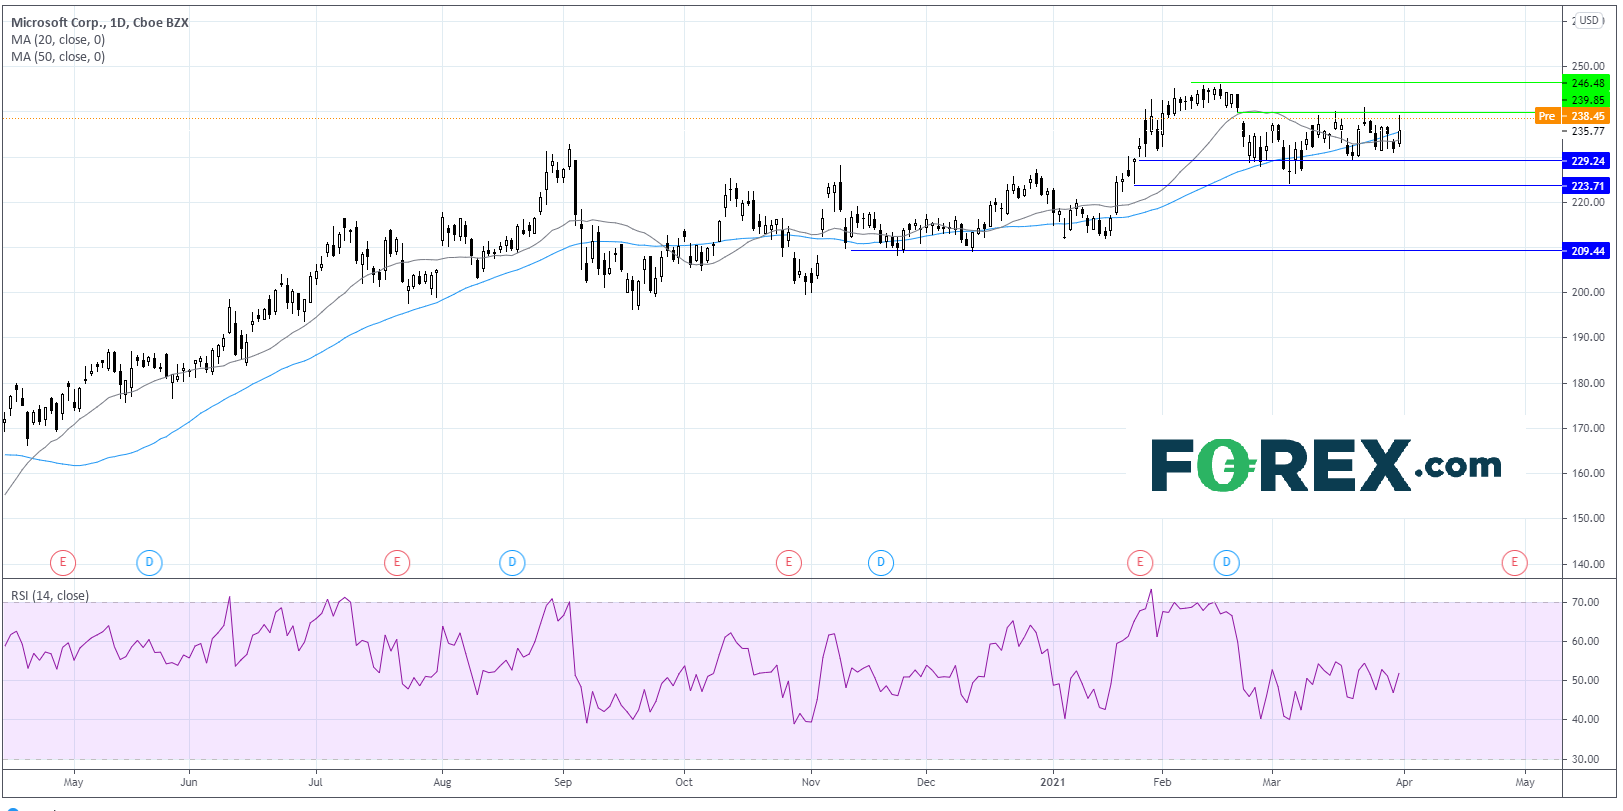 Chart analysis of Microsoft Corp performance. Published in April 2021 by FOREX.com